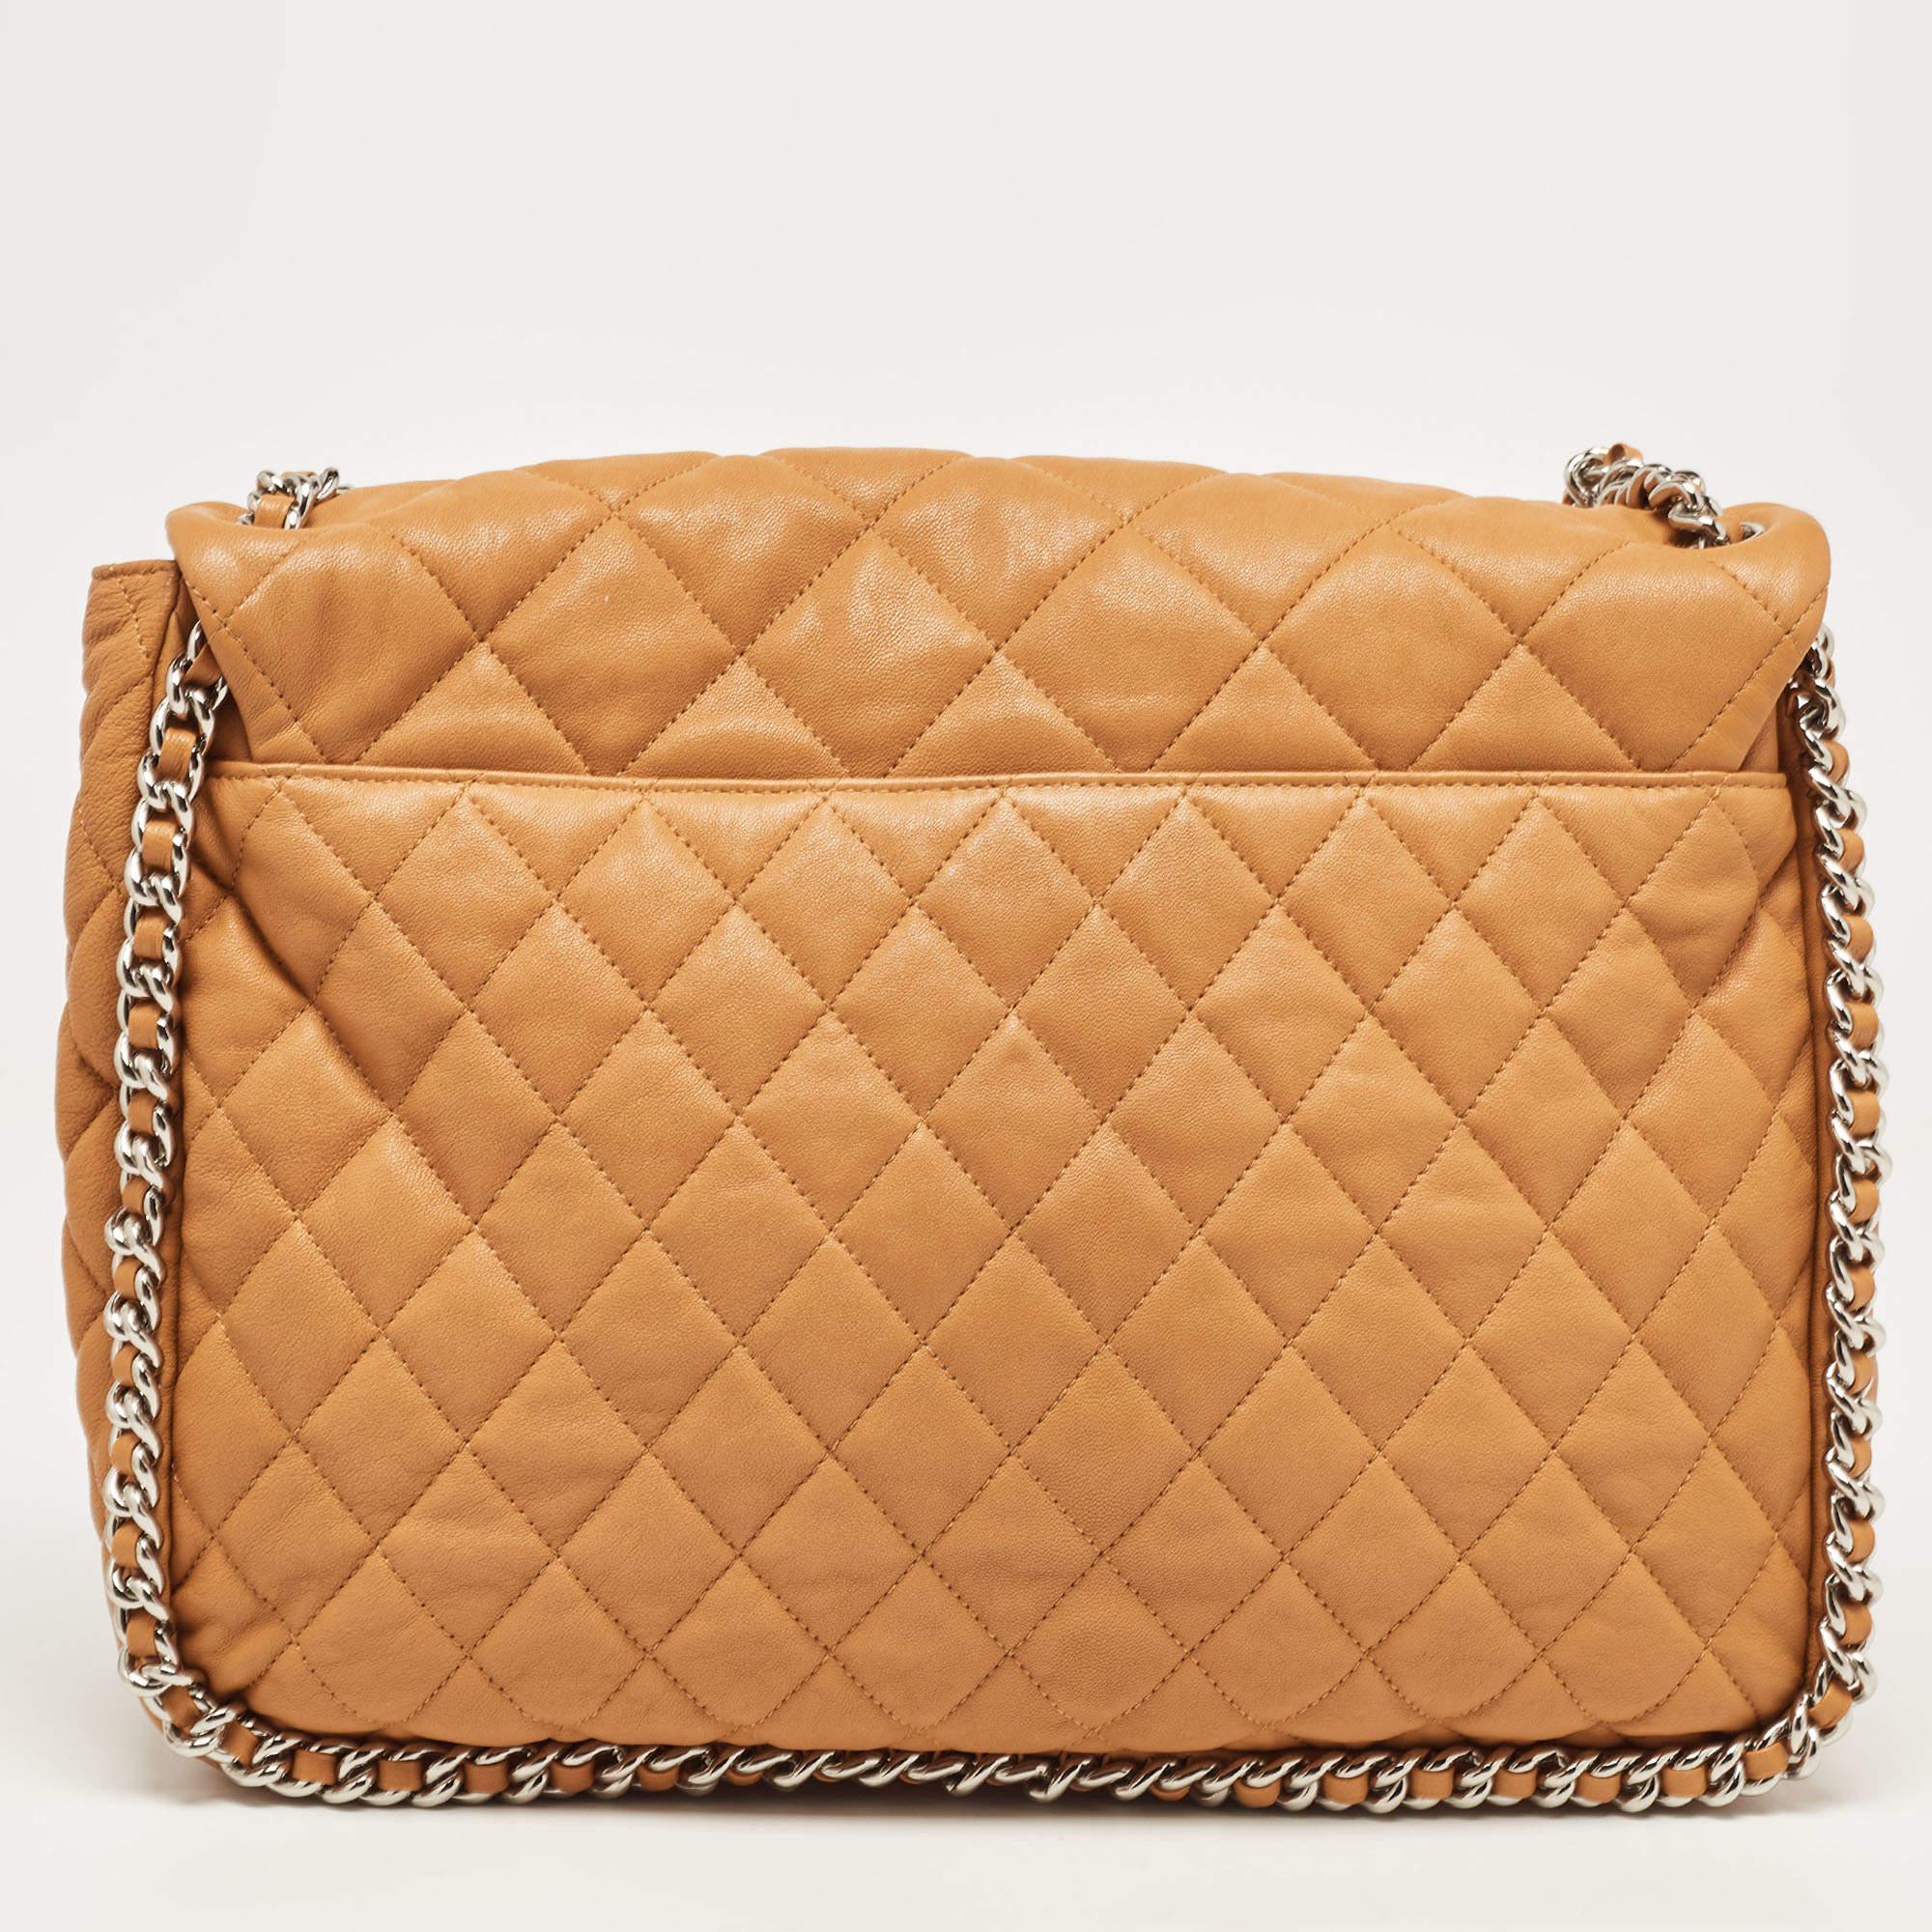 This Chanel bag is perfect for your fashion arsenal, bringing along the iconic quilt pattern, the CC logo on the flap, and woven chains outlining the bag and ending as a shoulder strap. It is finely crafted from leather and equipped with a spacious